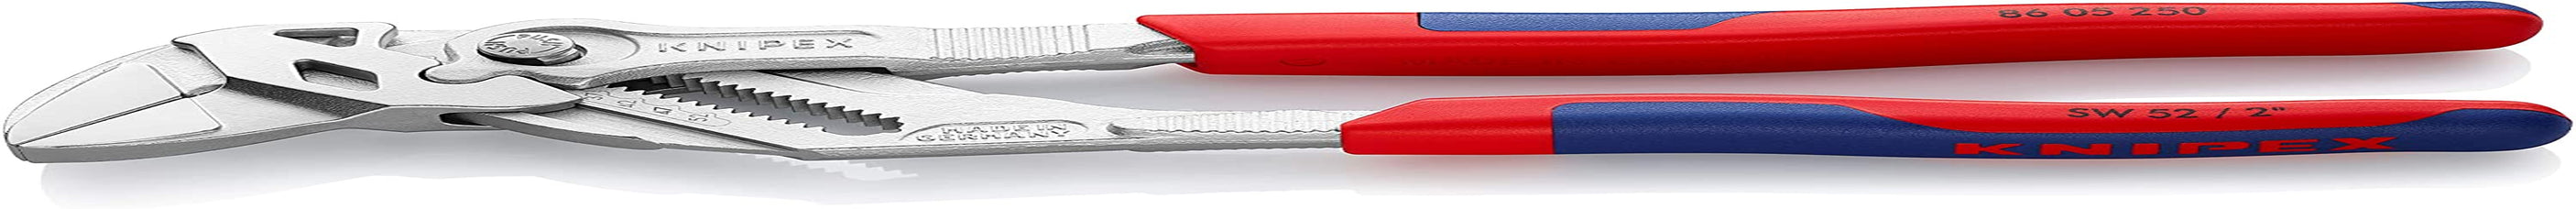 KNIPEX Tools, KNIPEX Tools 86 05 250 10-Inch Pliers Wrench with Comfort Grip